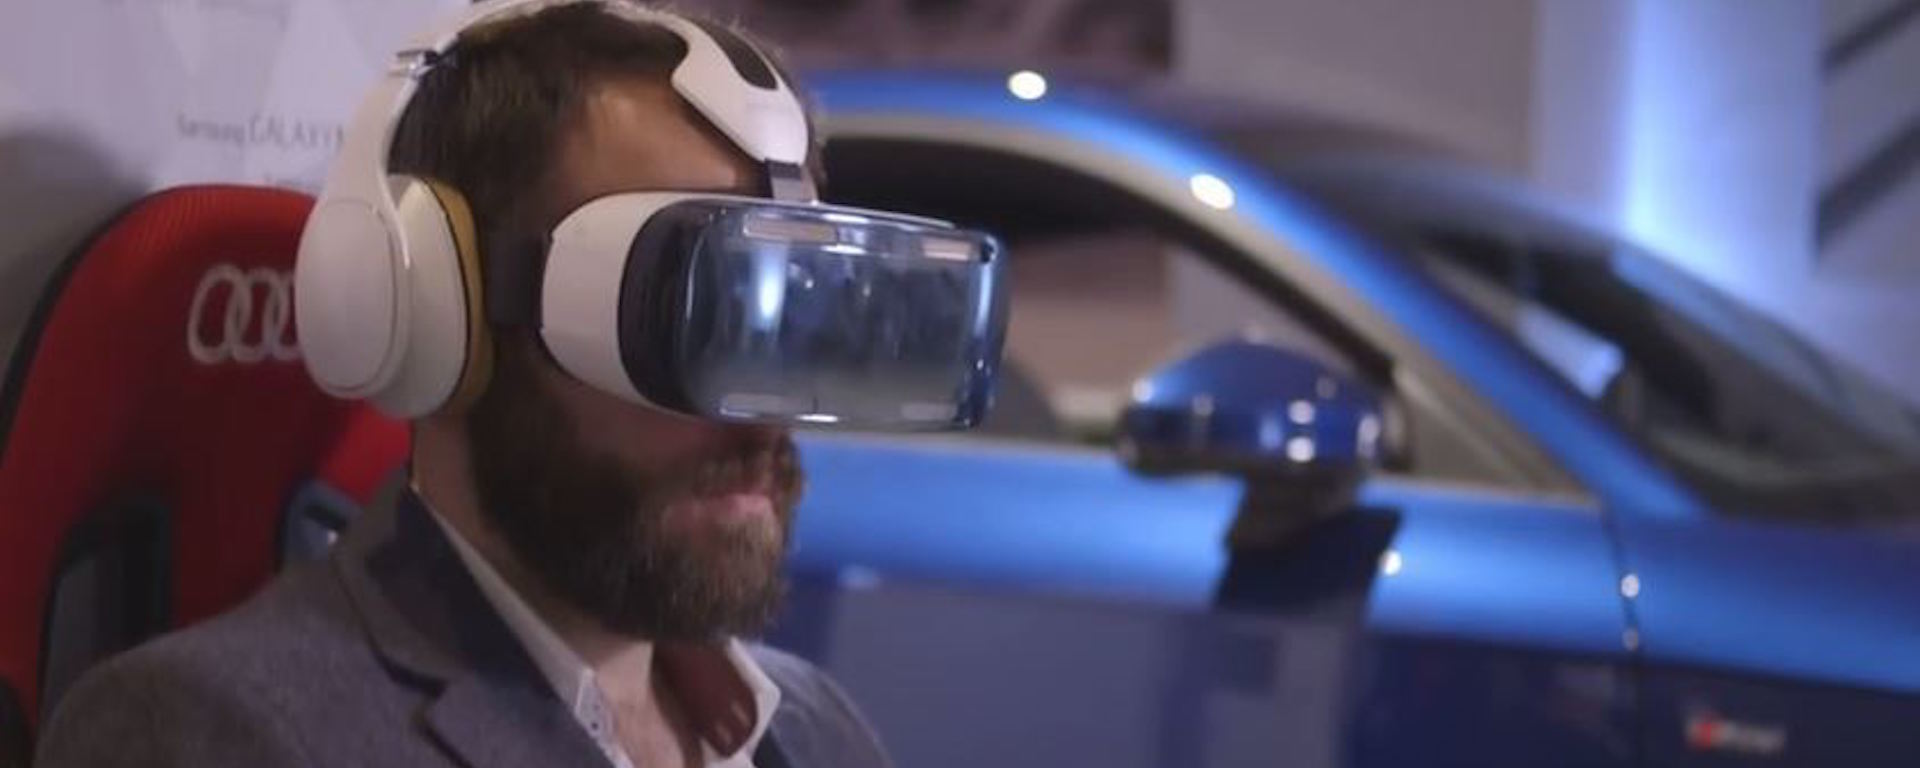 The Car Showroom Test-Drive Get a Virtual Reality Check [VIDEO]